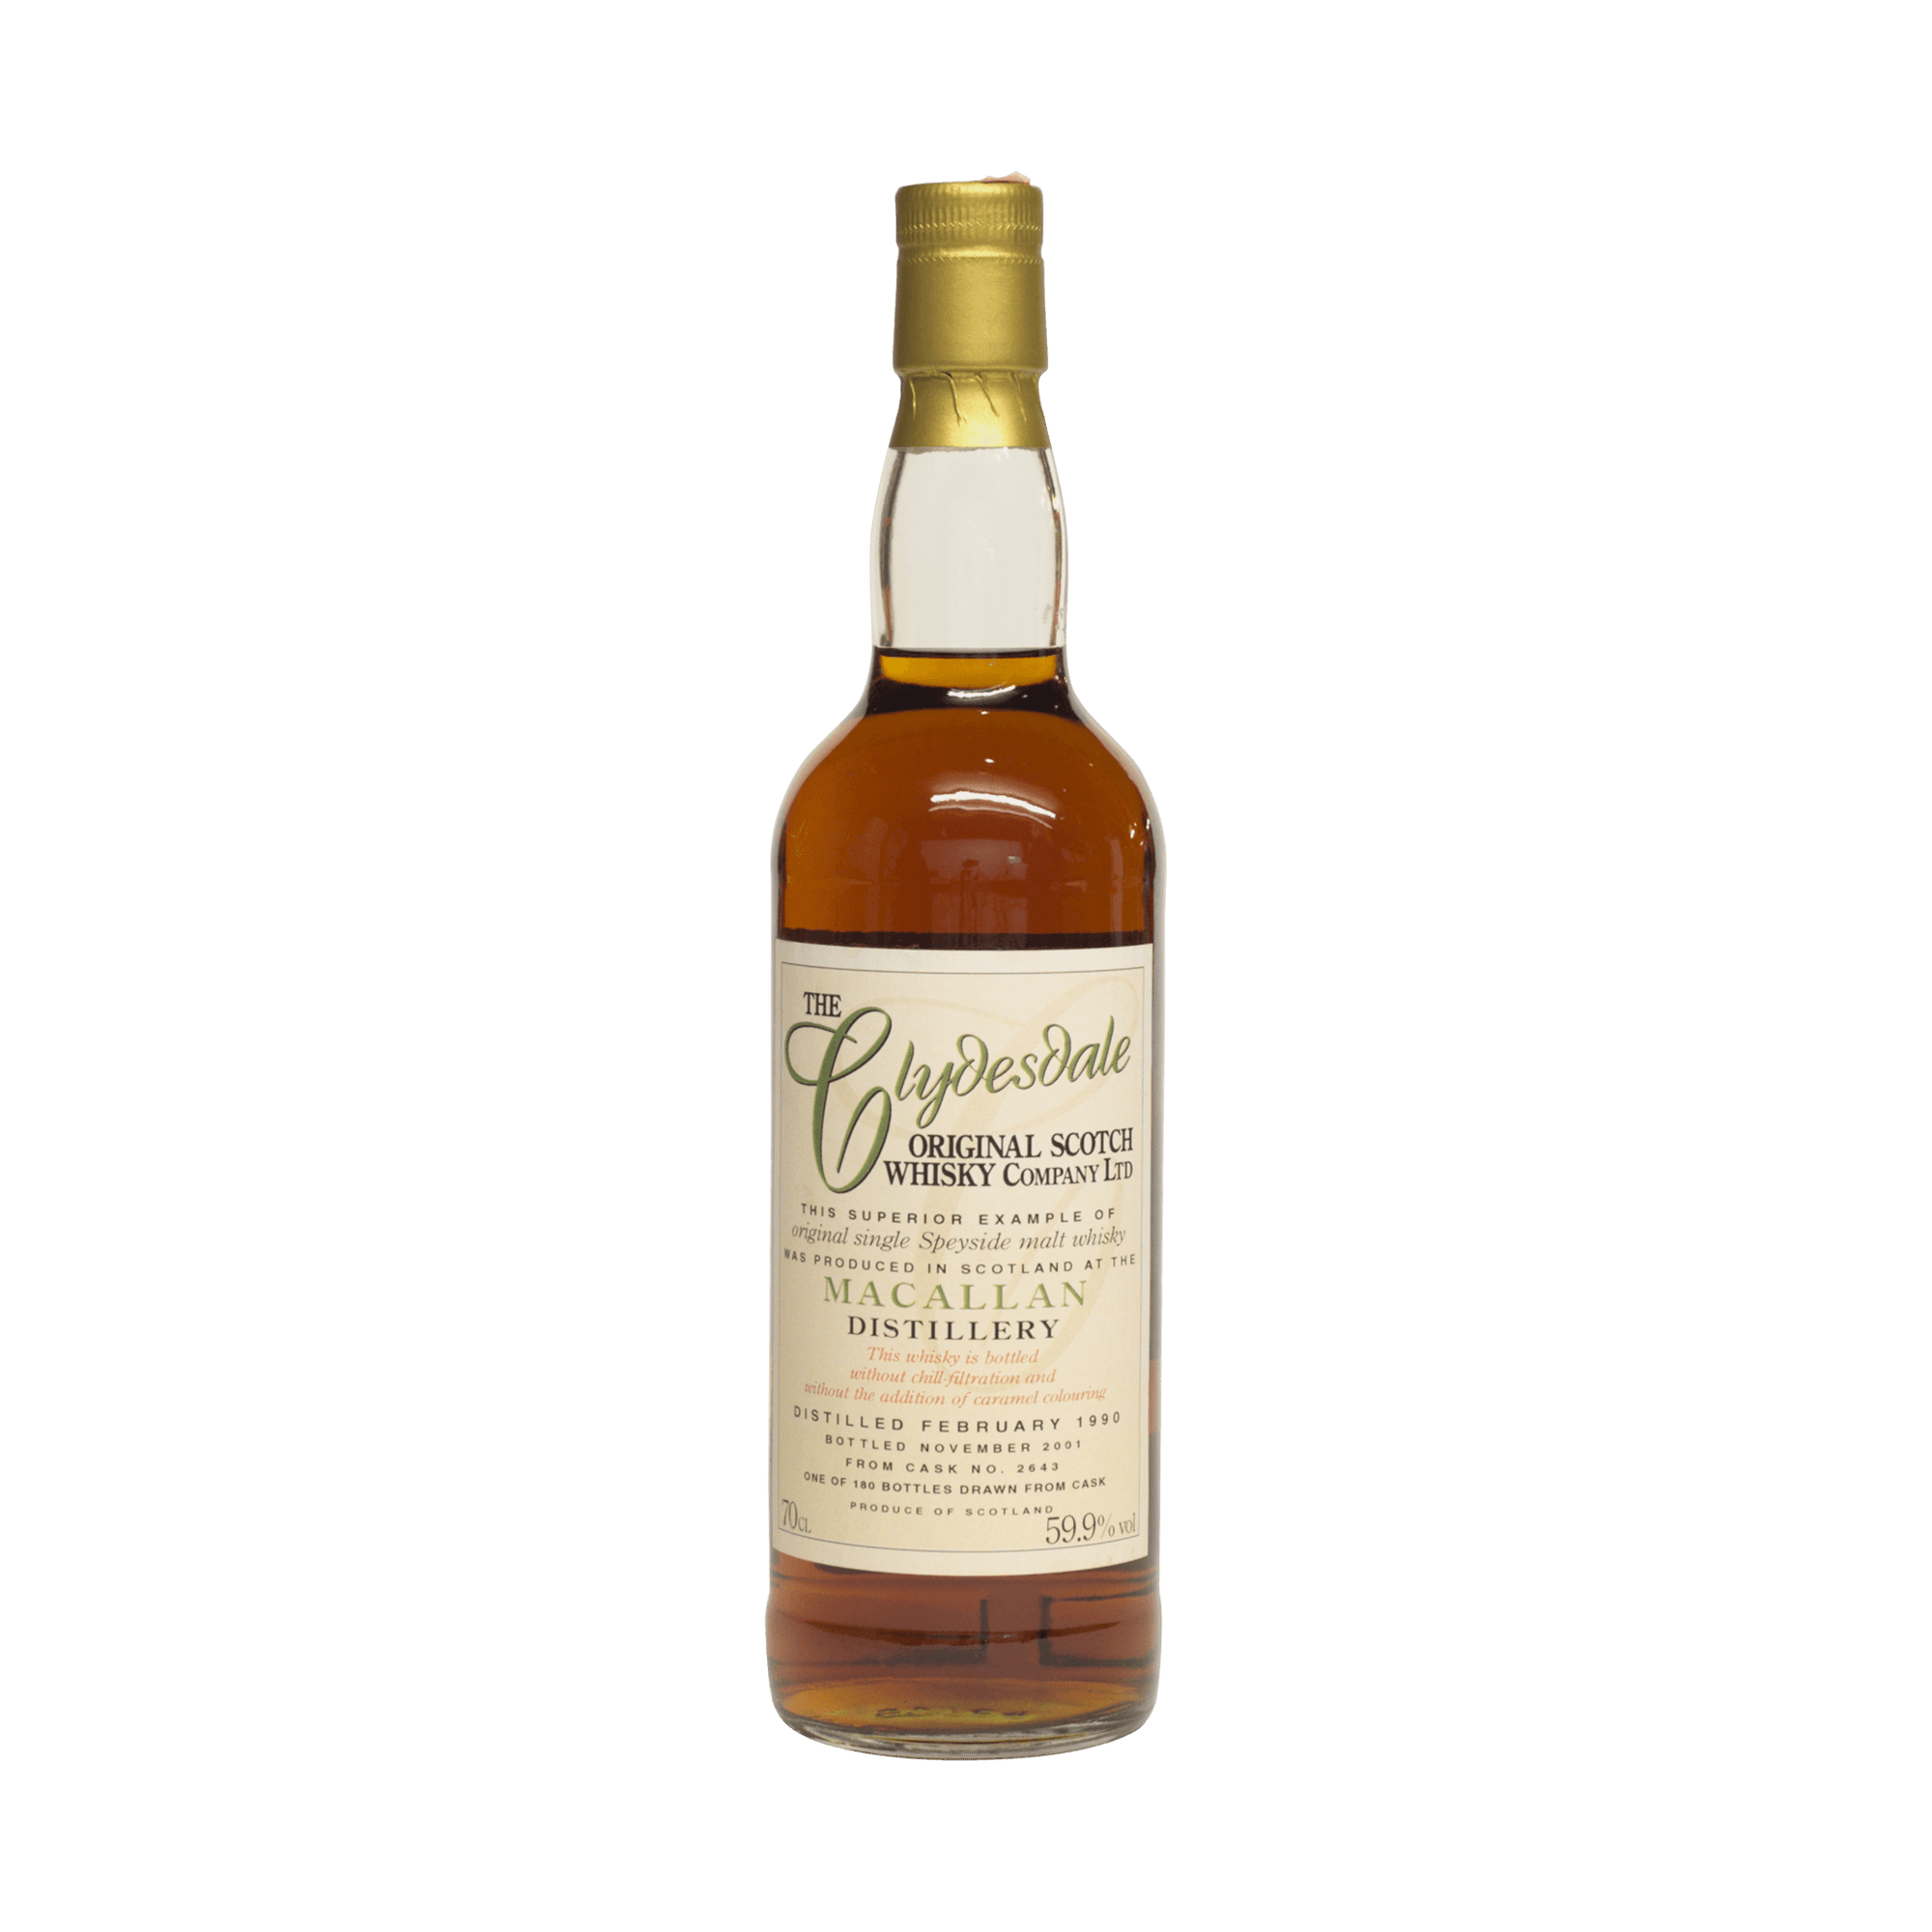 Macallan 1990 11 Year Old The Clydesdale Single Cask 59.90%